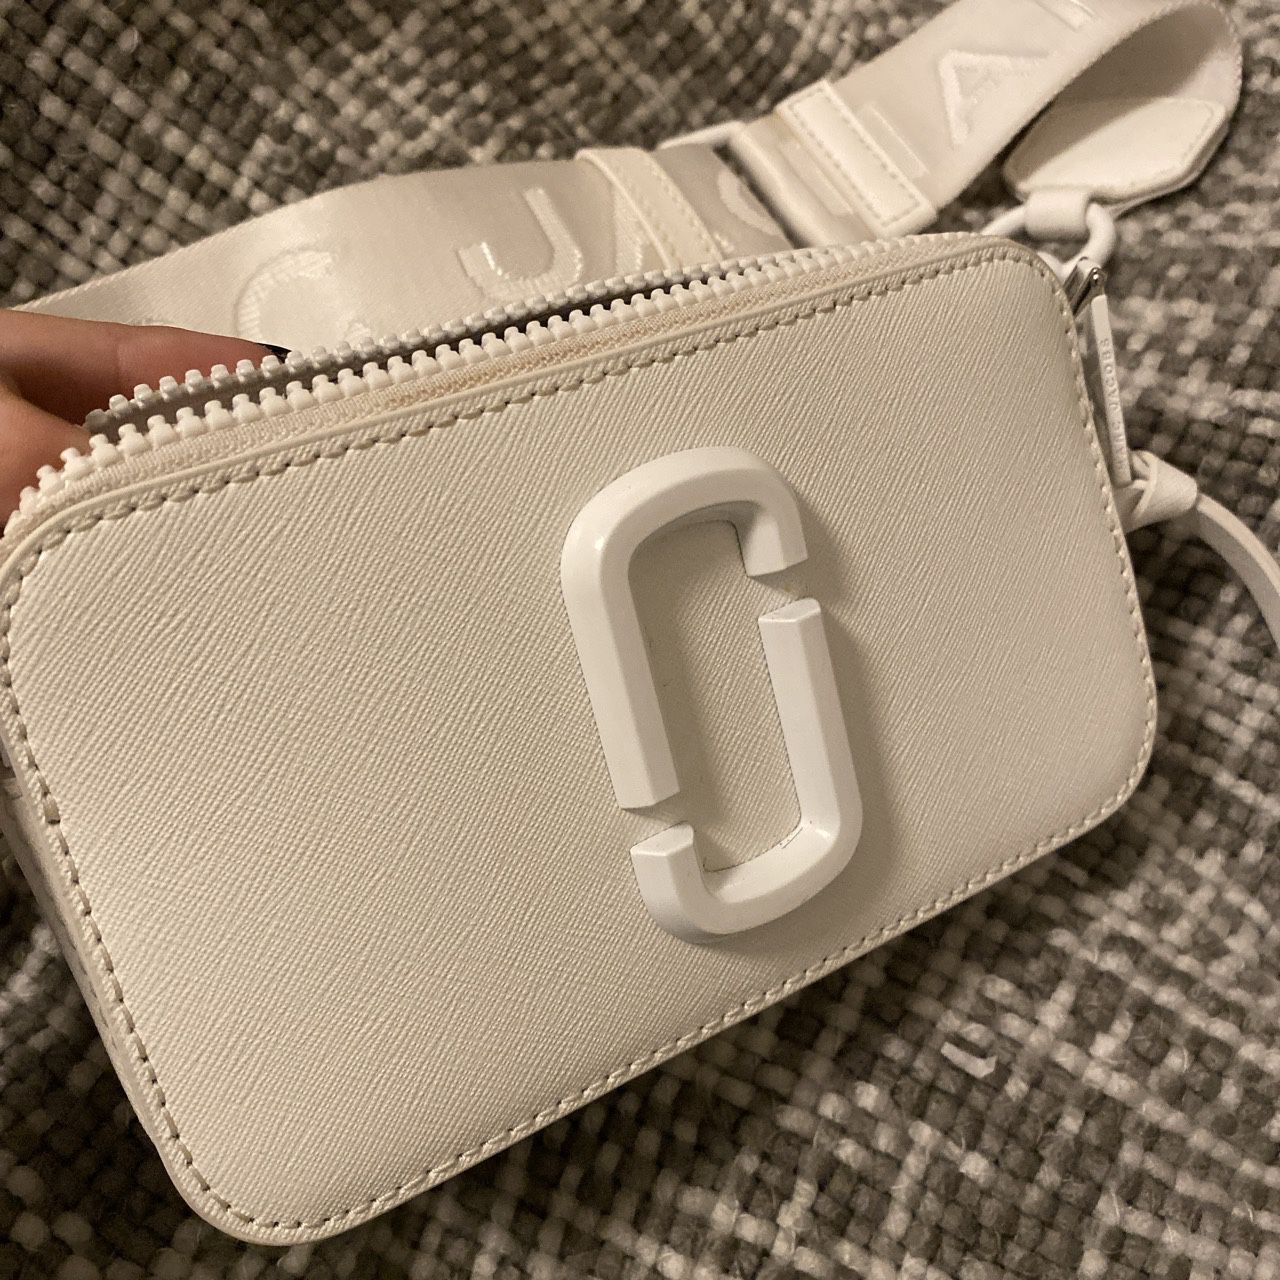 Authentic Marc Jacobs bag this season & worn 3 times